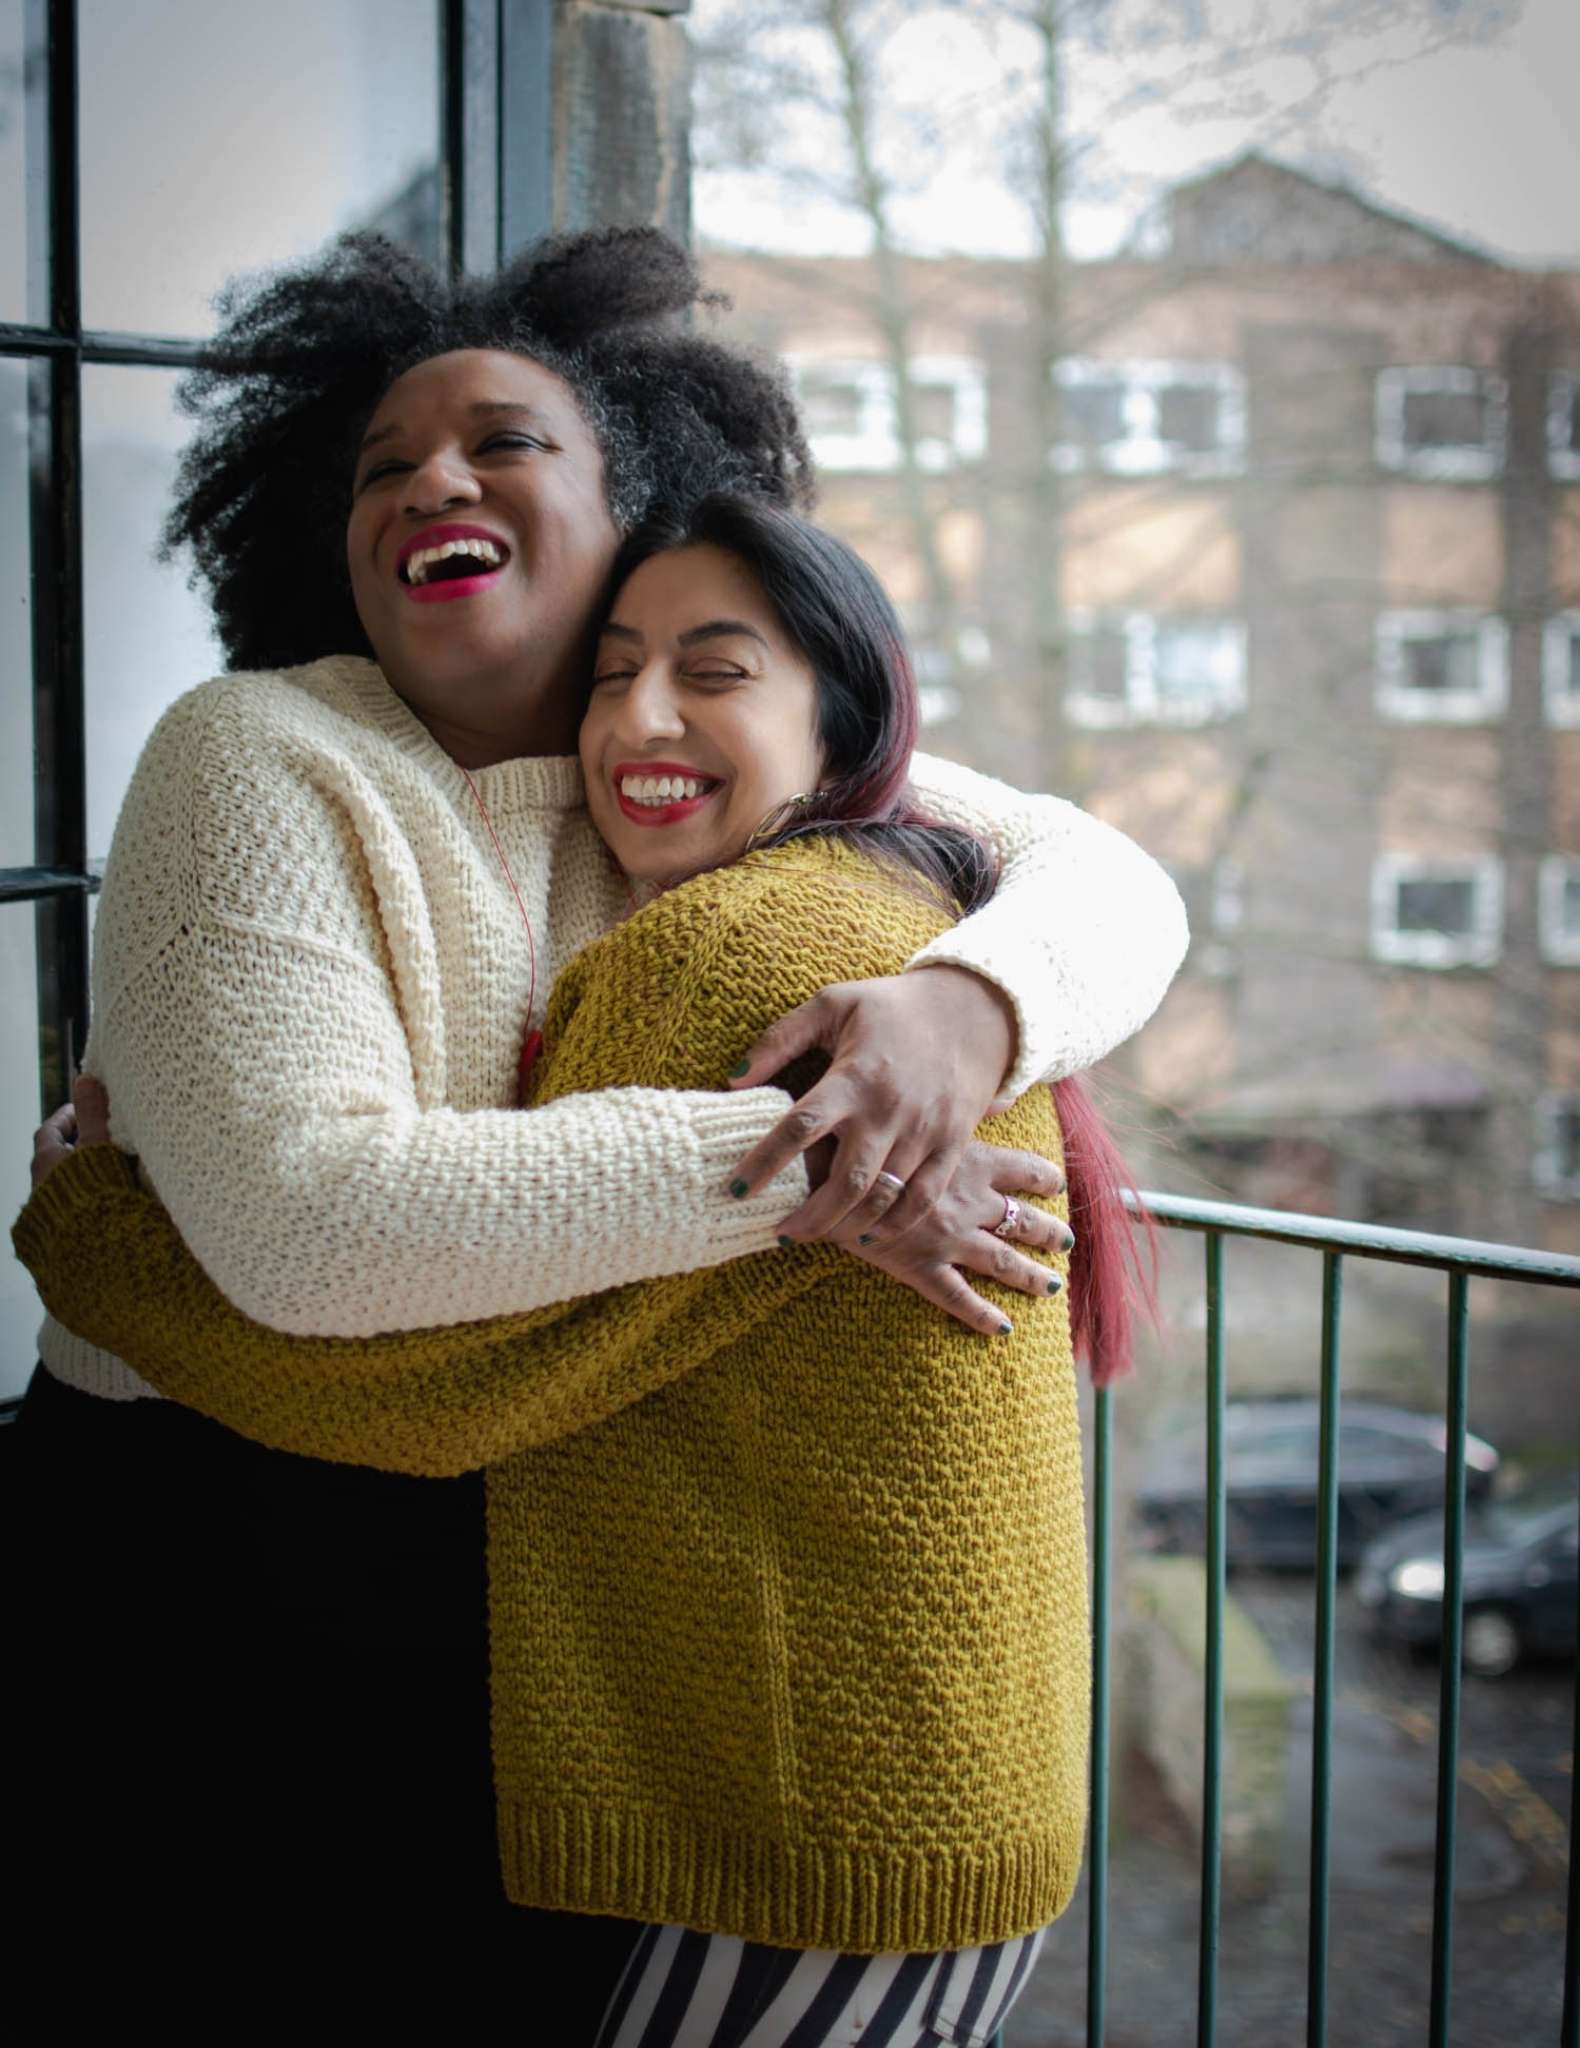 Two models stand indoors in front of a window, looking out onto a street. One wears a cream sweater and the other wears a gold sweater, they have their arms around each other in a tight hug and are grinning.